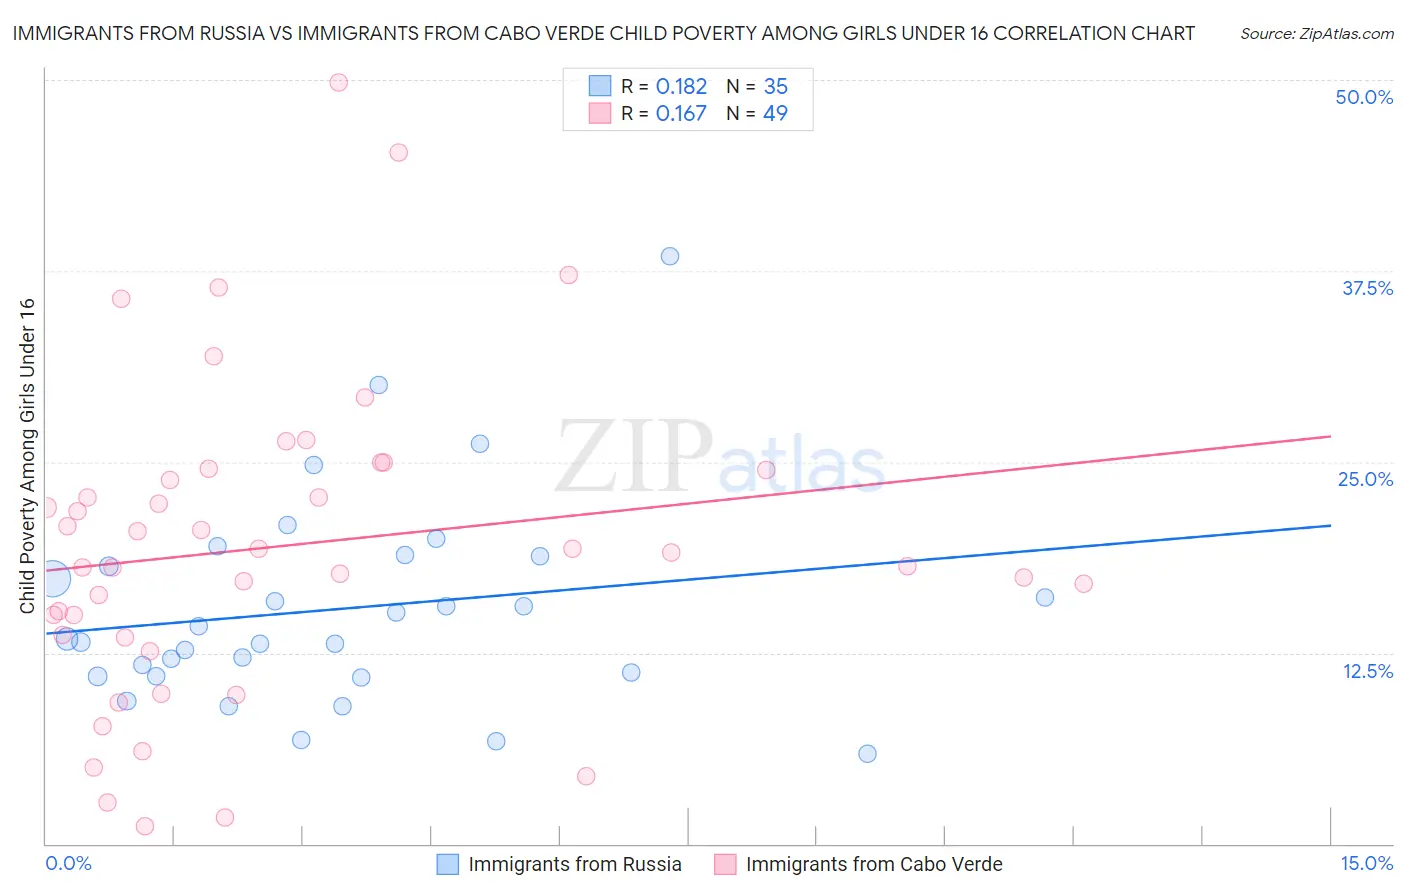 Immigrants from Russia vs Immigrants from Cabo Verde Child Poverty Among Girls Under 16